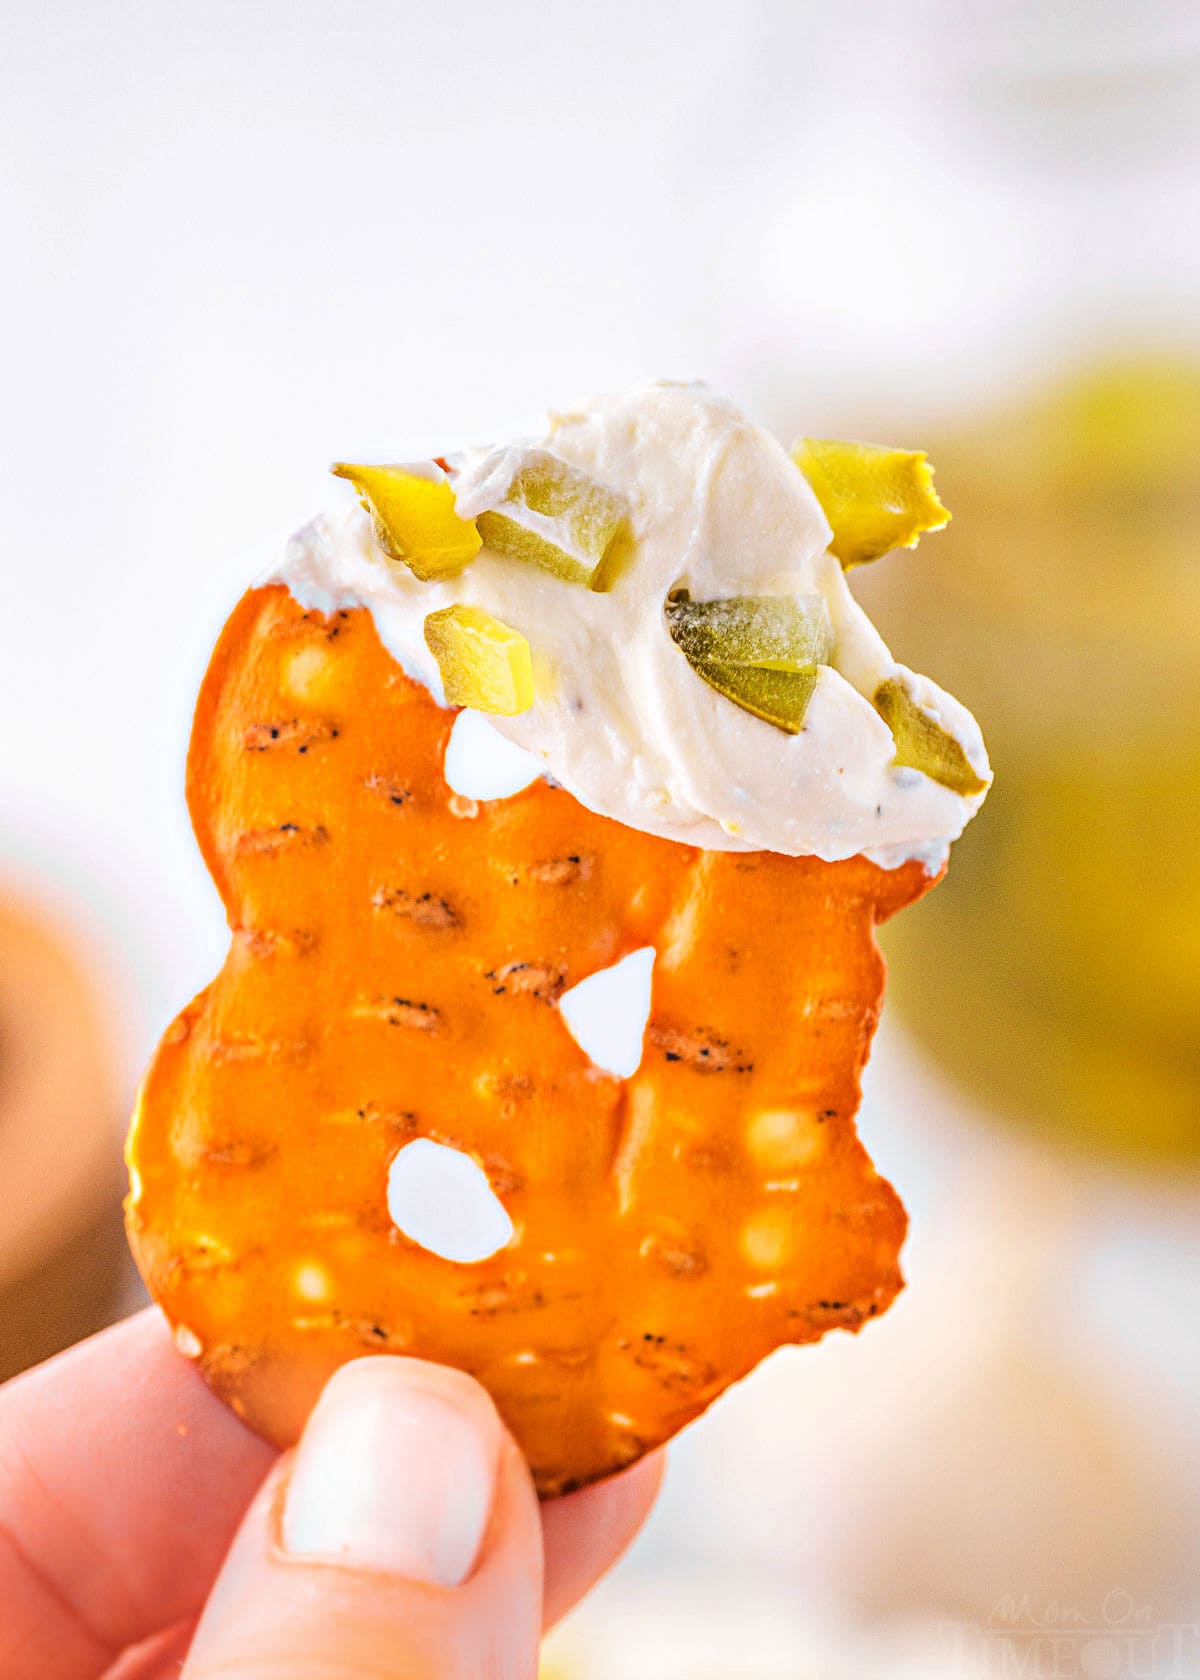 pretzel chip is being held up with dill pickle dip on the end of the pretzel.